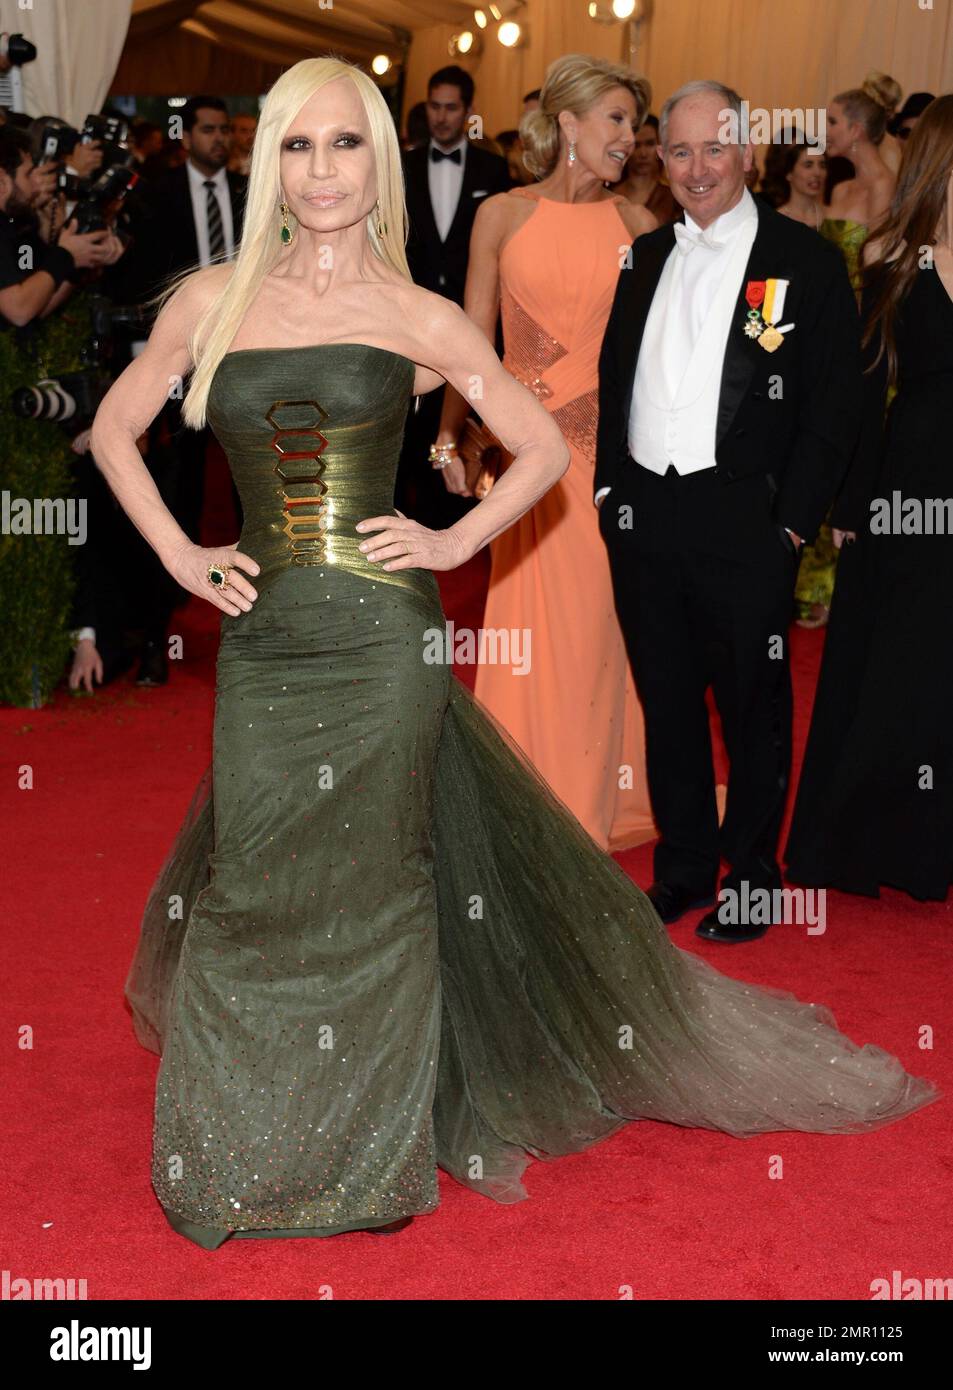 FILE - In this May 5, 2014, file photo, Donatella Versace attends The  Metropolitan Museum of Art's Costume Institute benefit gala celebrating  "Charles James: Beyond Fashion" in New York. The Met announced